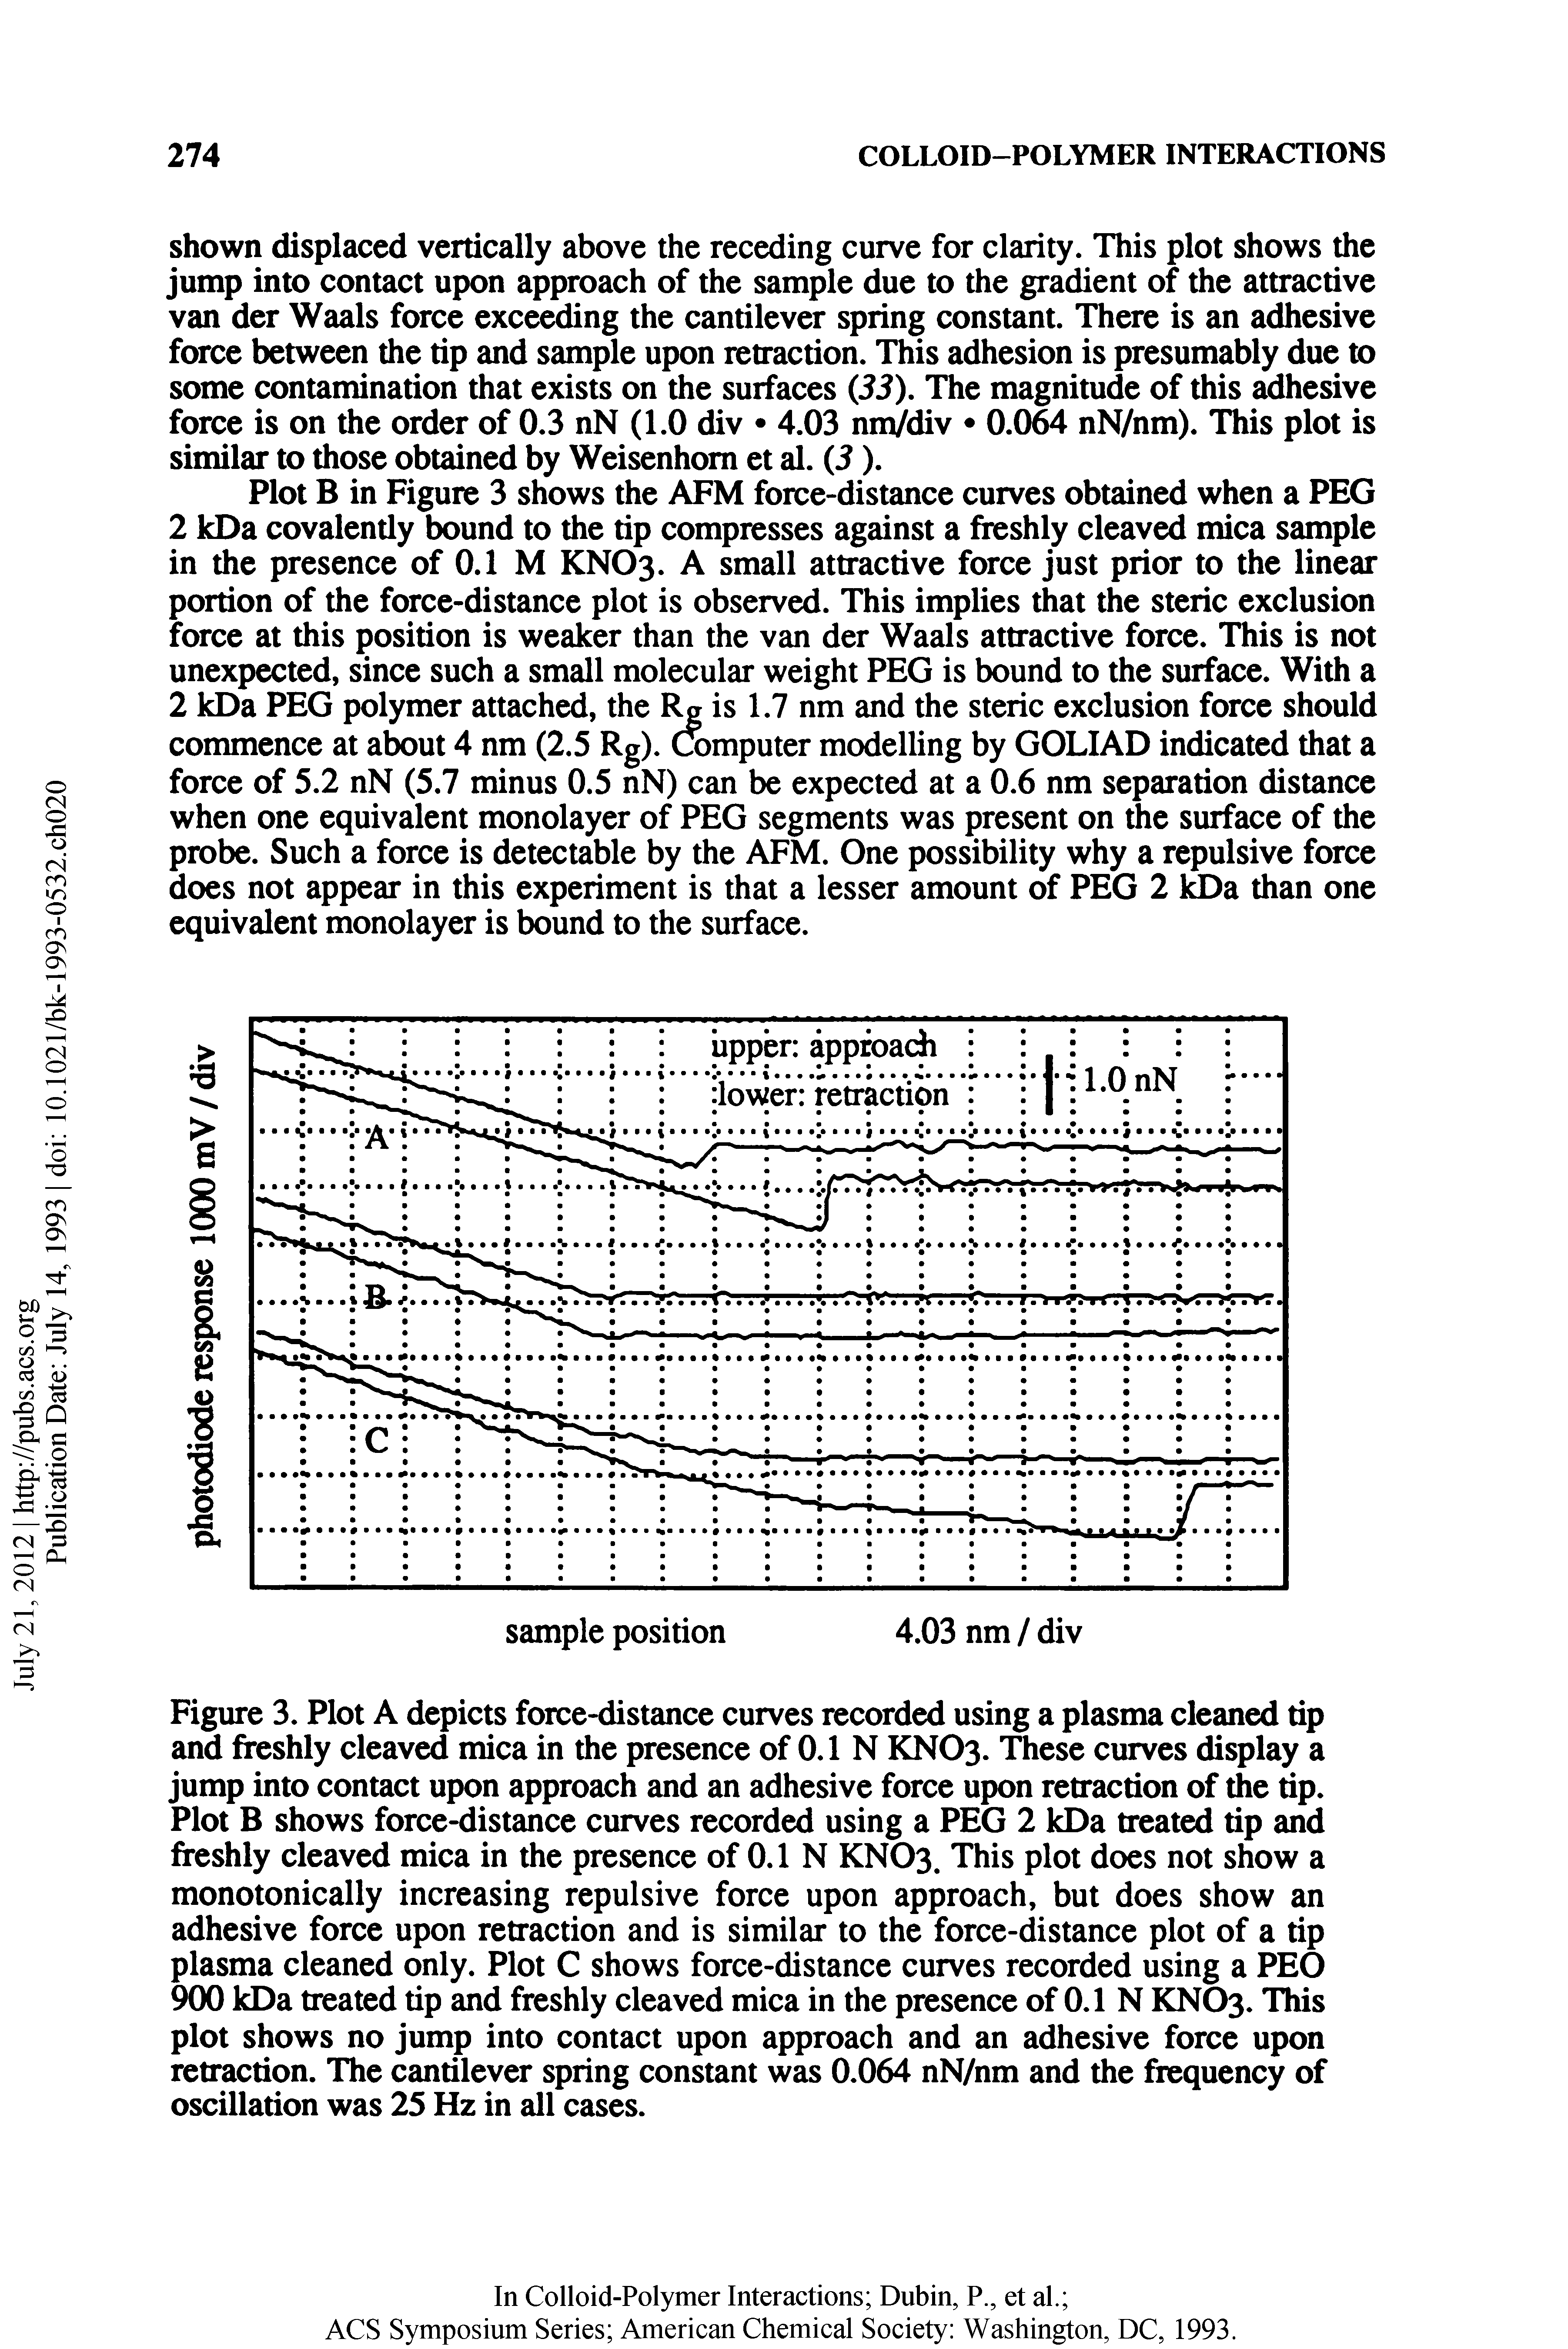 Figure 3. Plot A depicts force-distance curves recorded using a plasma cleaned tip and freshly cleaved mica in the presence of 0.1 N KNO3. These curves display a jump into contact upon approach and an adhesive force upon retraction of the tip. Plot B shows force-distance curves recorded using a PEG 2 IdDa treated tip and freshly cleaved mica in the presence of 0.1 N KNO3. This plot does not show a monotonically increasing repulsive force upon approach, but does show an adhesive force upon retraction and is similar to the force-distance plot of a tip plasma cleaned only. Plot C shows force-distance curves recorded using a PEG 9(X) kDa treated tip and freshly cleaved mica in the presence of 0.1 N KNO3. This plot shows no jump into contact upon approach and an adhesive force upon retraction. The cantilever spring constant was 0.064 nN/nm and the frequency of oscillation was 25 Hz in all cases.